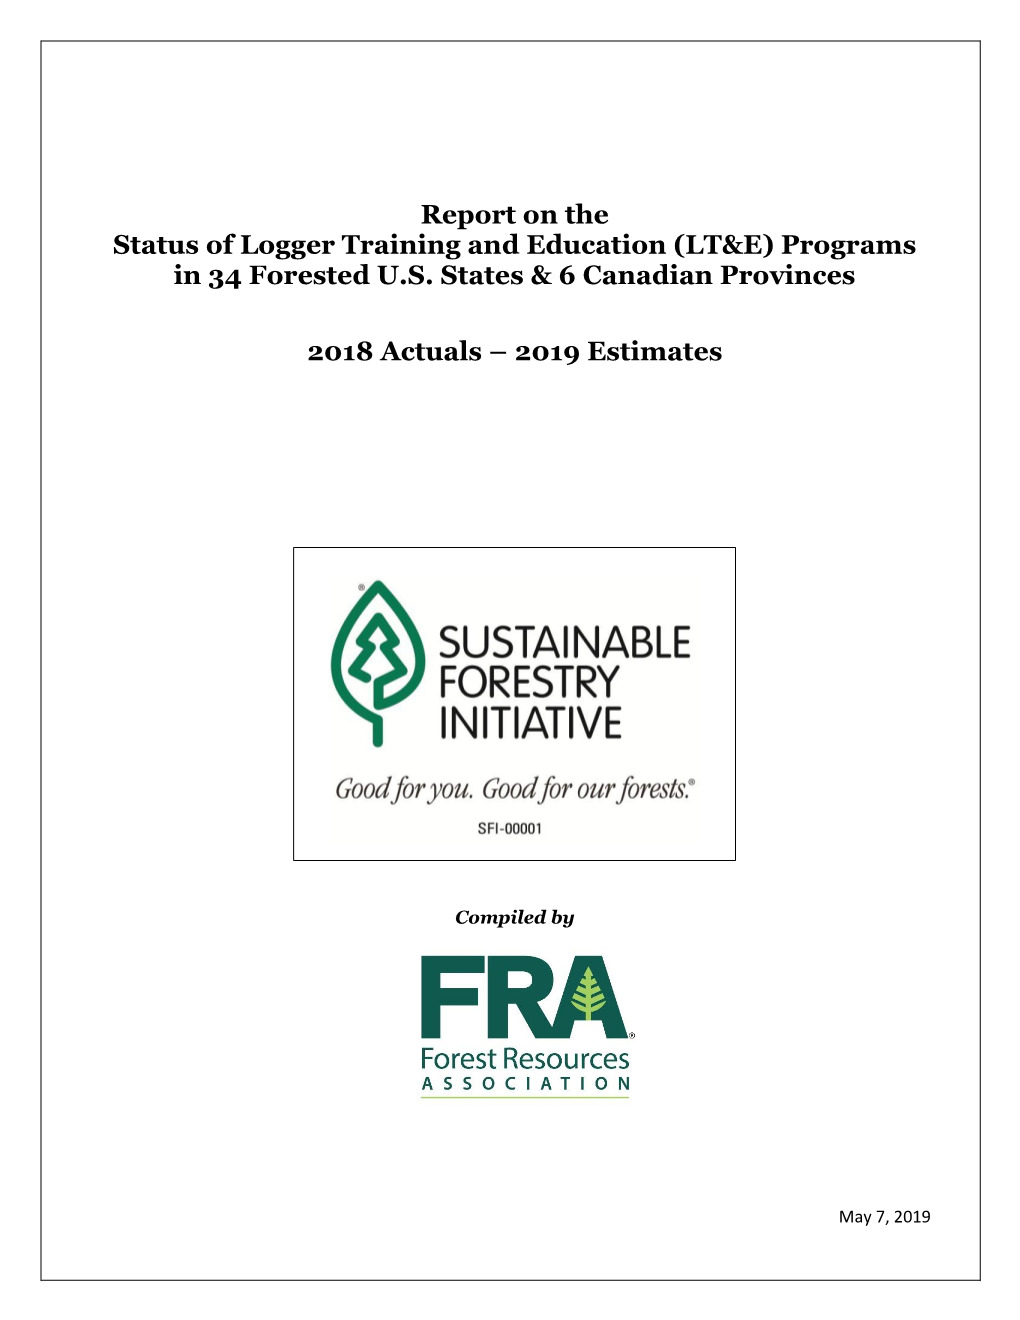 Report on the Status of Logger Training and Education (LT&E) Programs in 34 Forested U.S